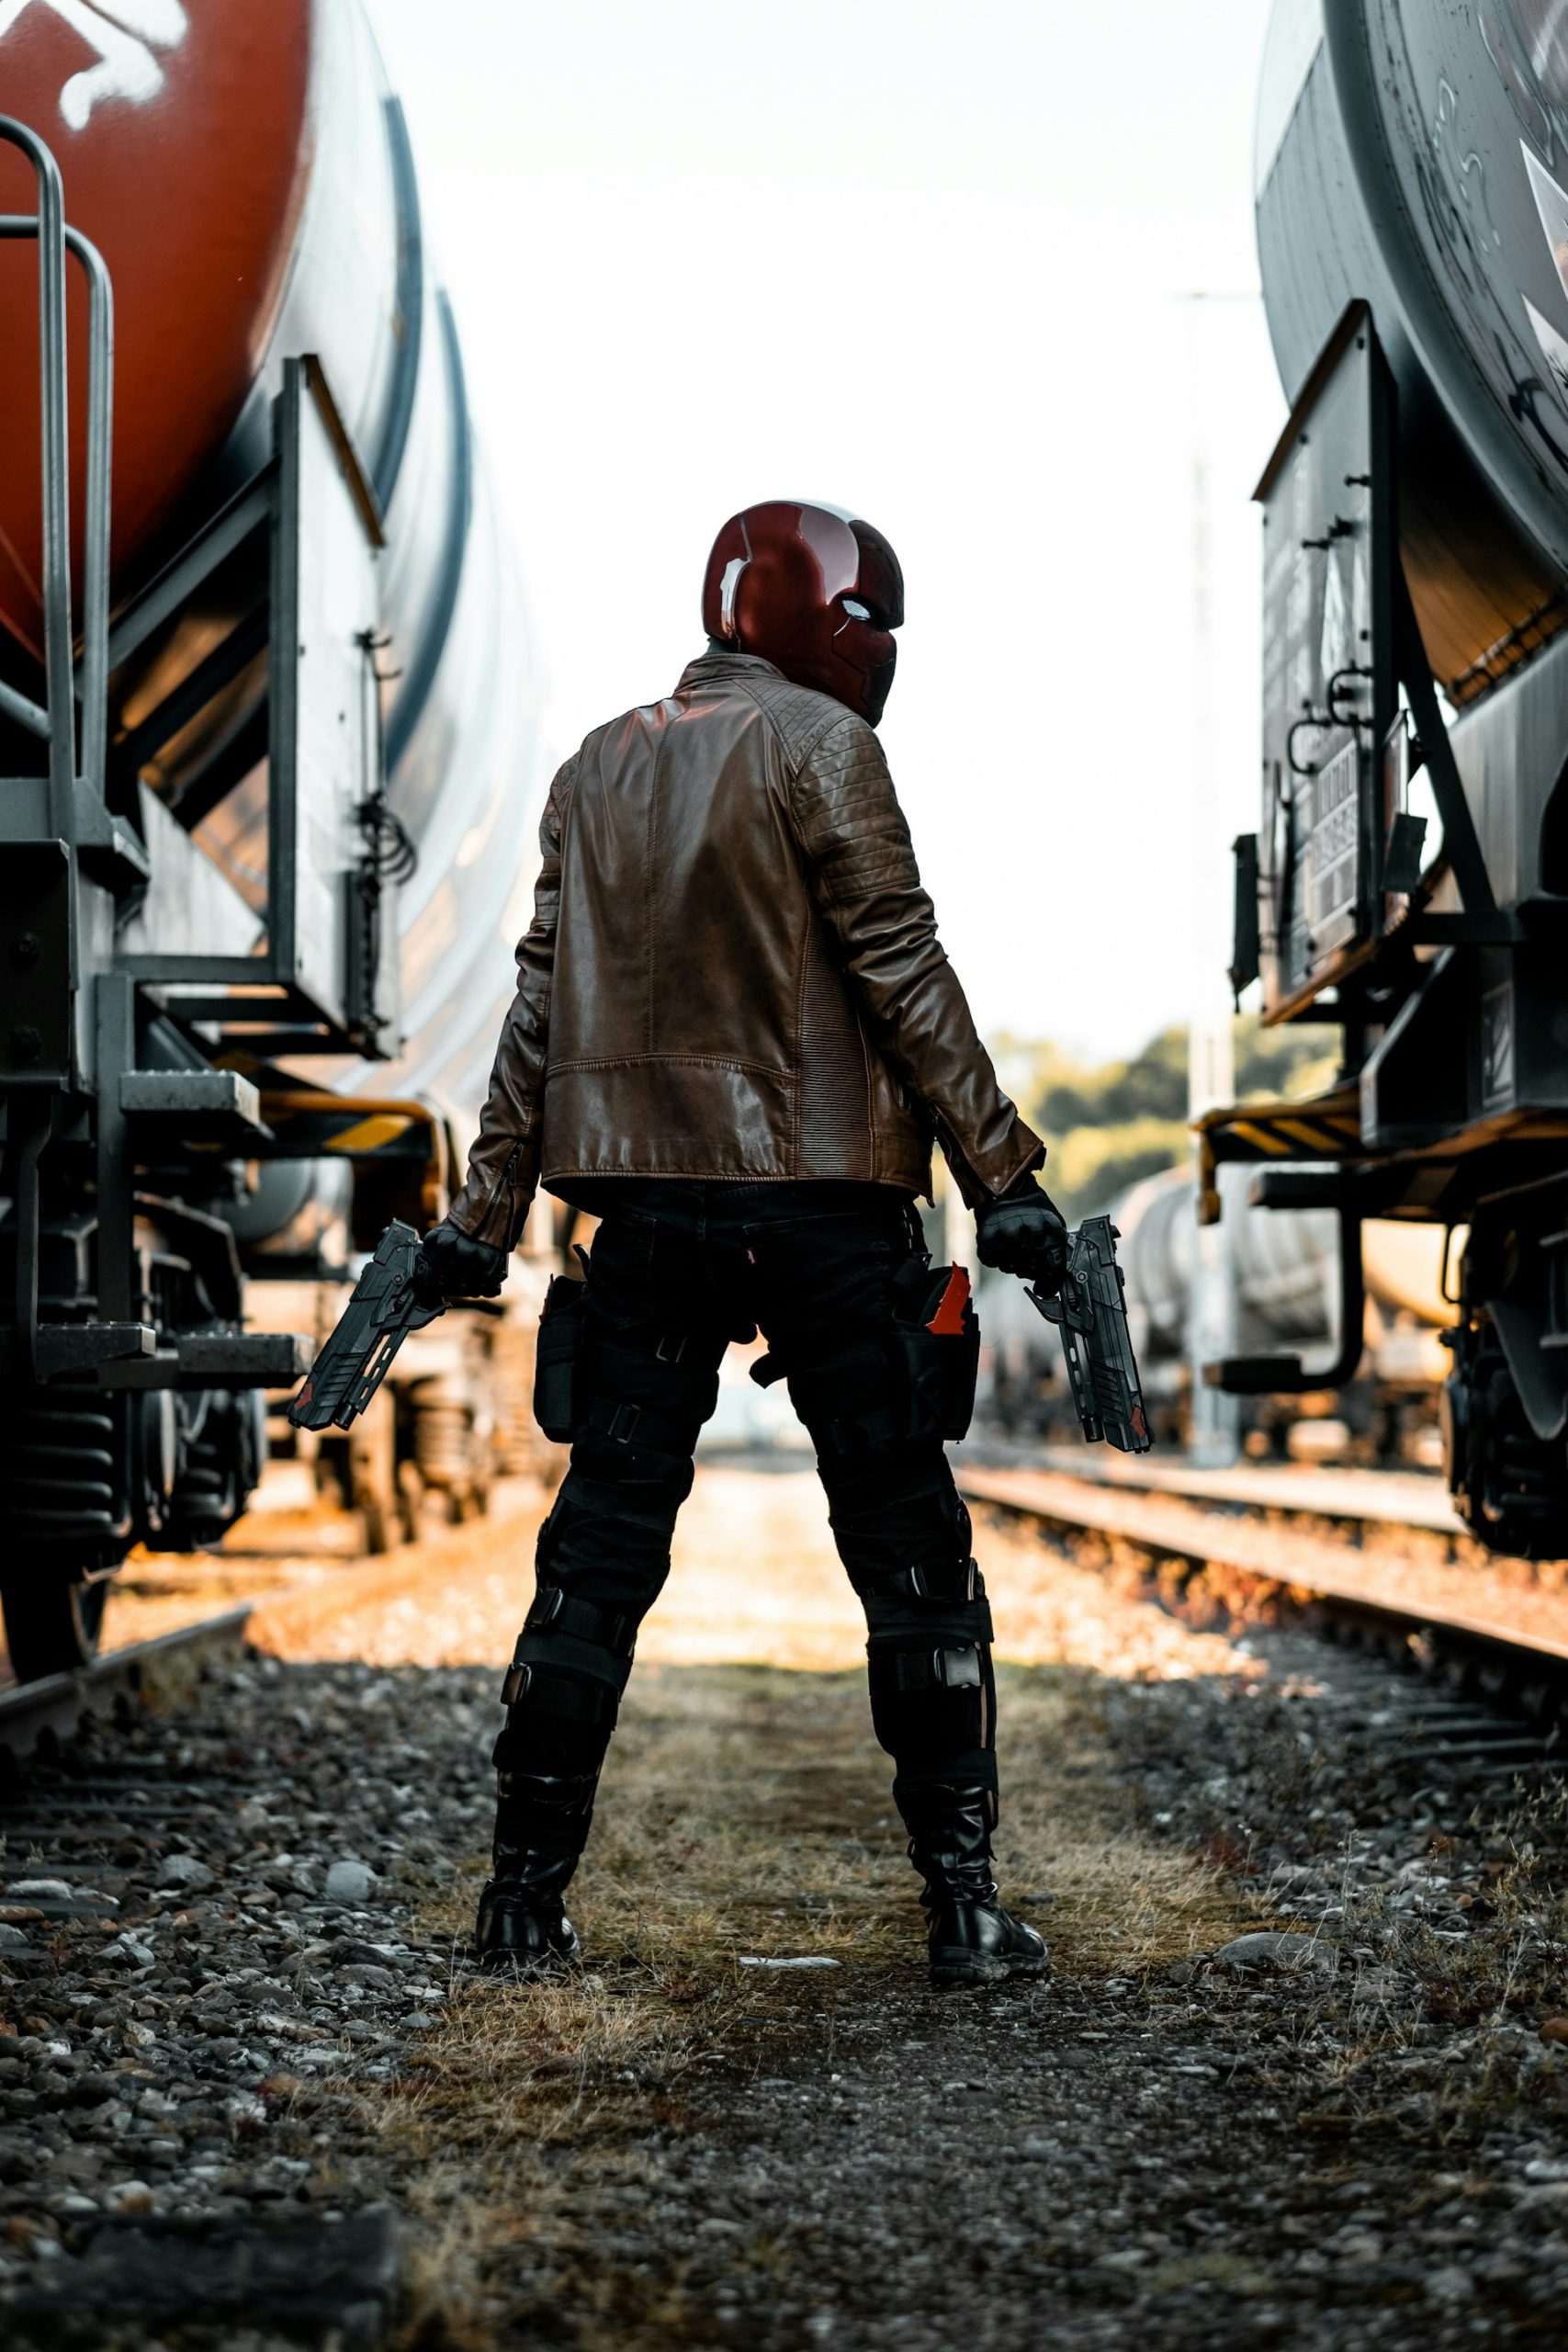 A masked villain stands facing away from the viewers, looking back over their shoulder. Flanked by 2 trains, they are holding 2 scifi guns and conceal their identity with a full coverage helmet.